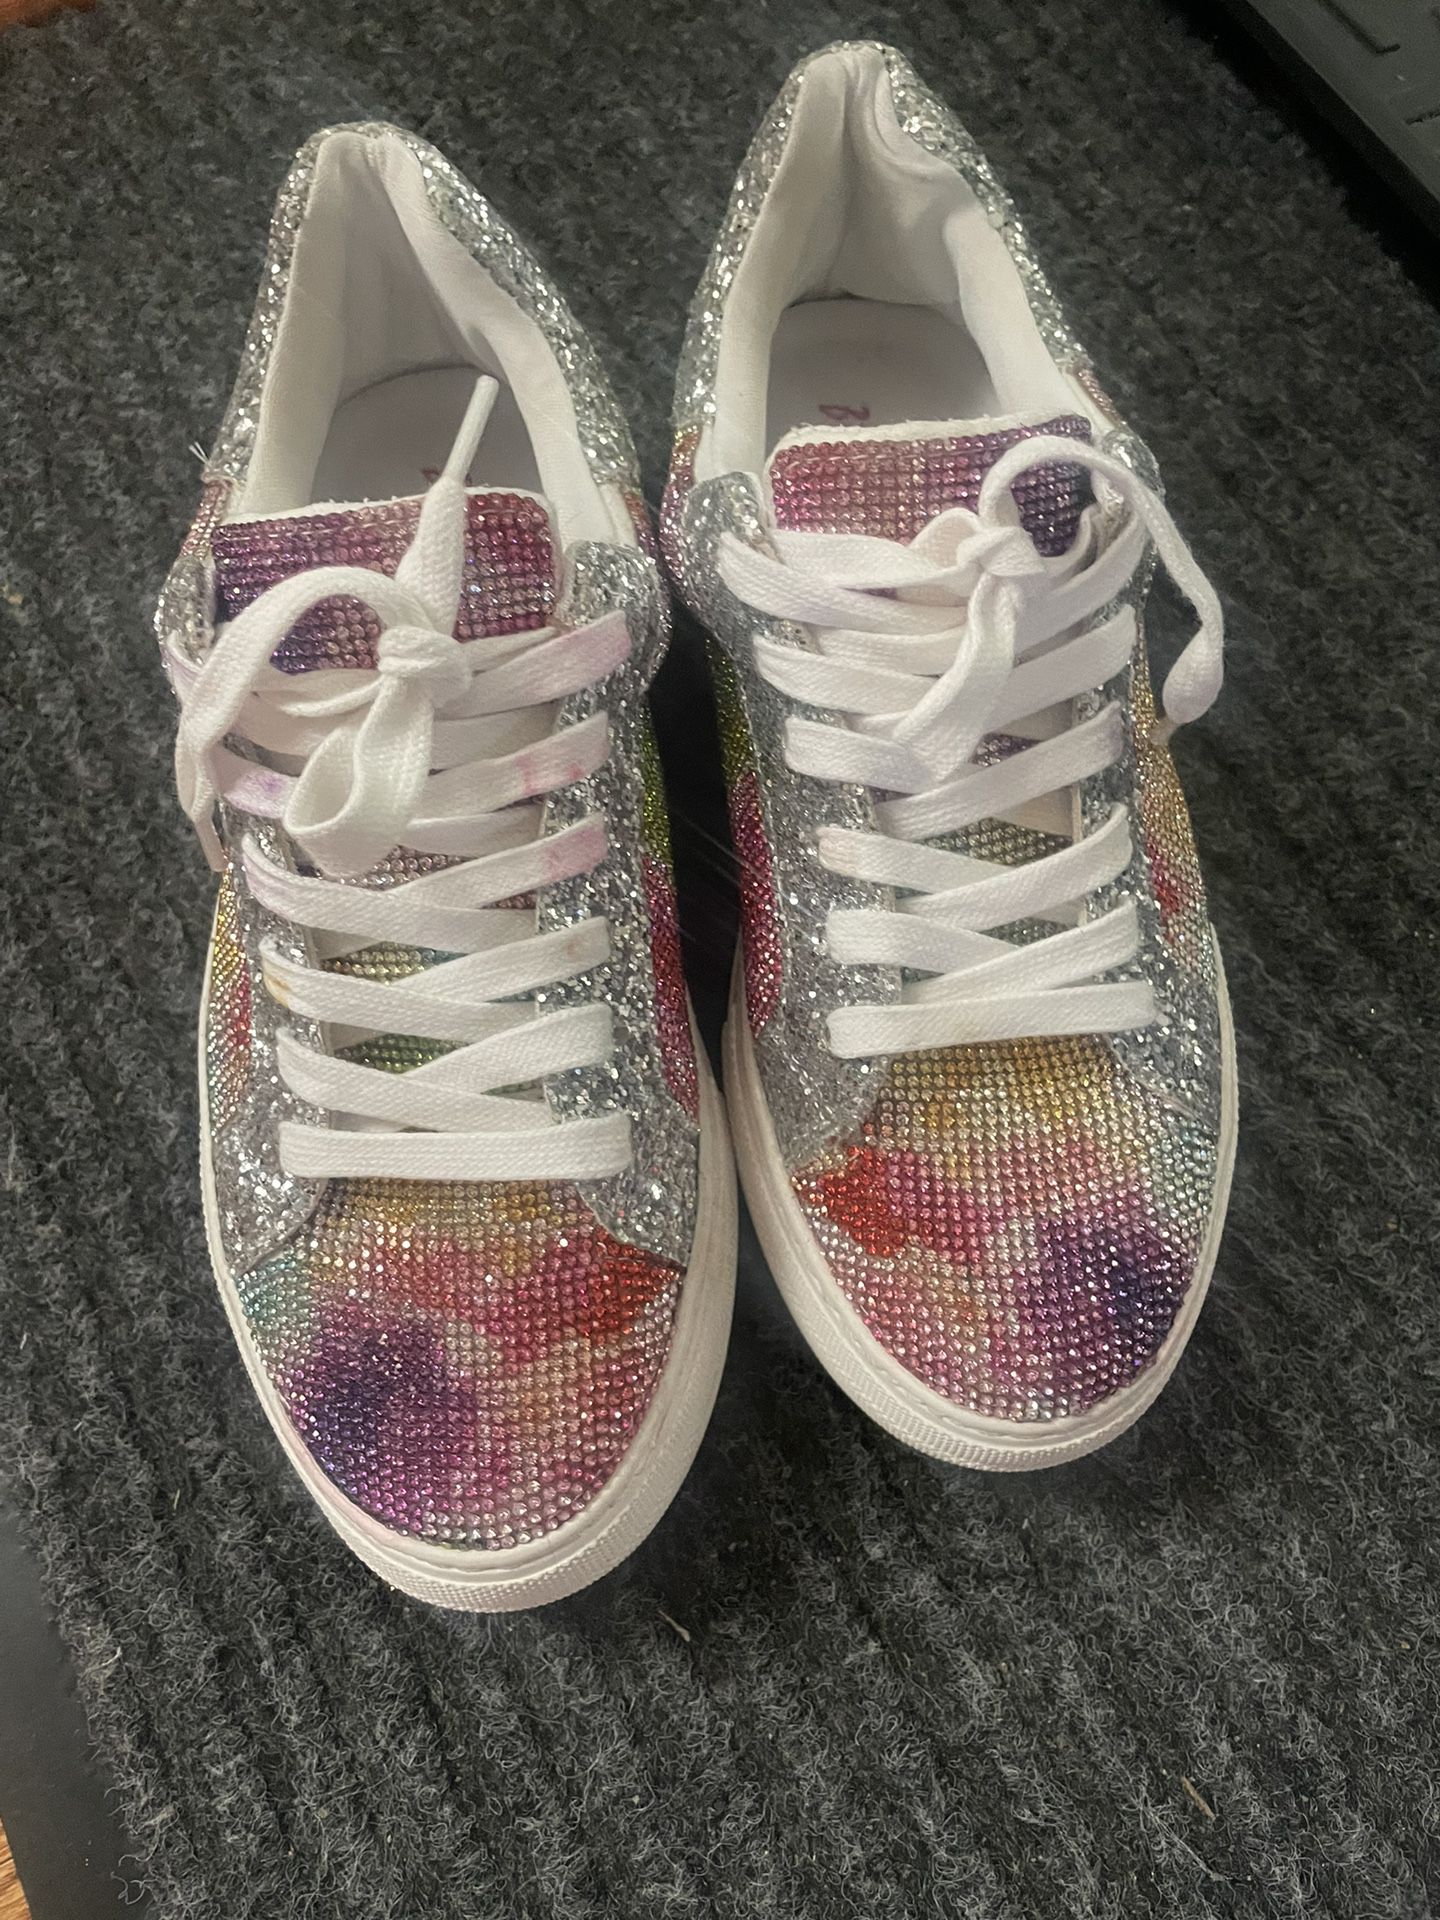 Betsey Johnson sparkly colorful fashion sneaker size 6